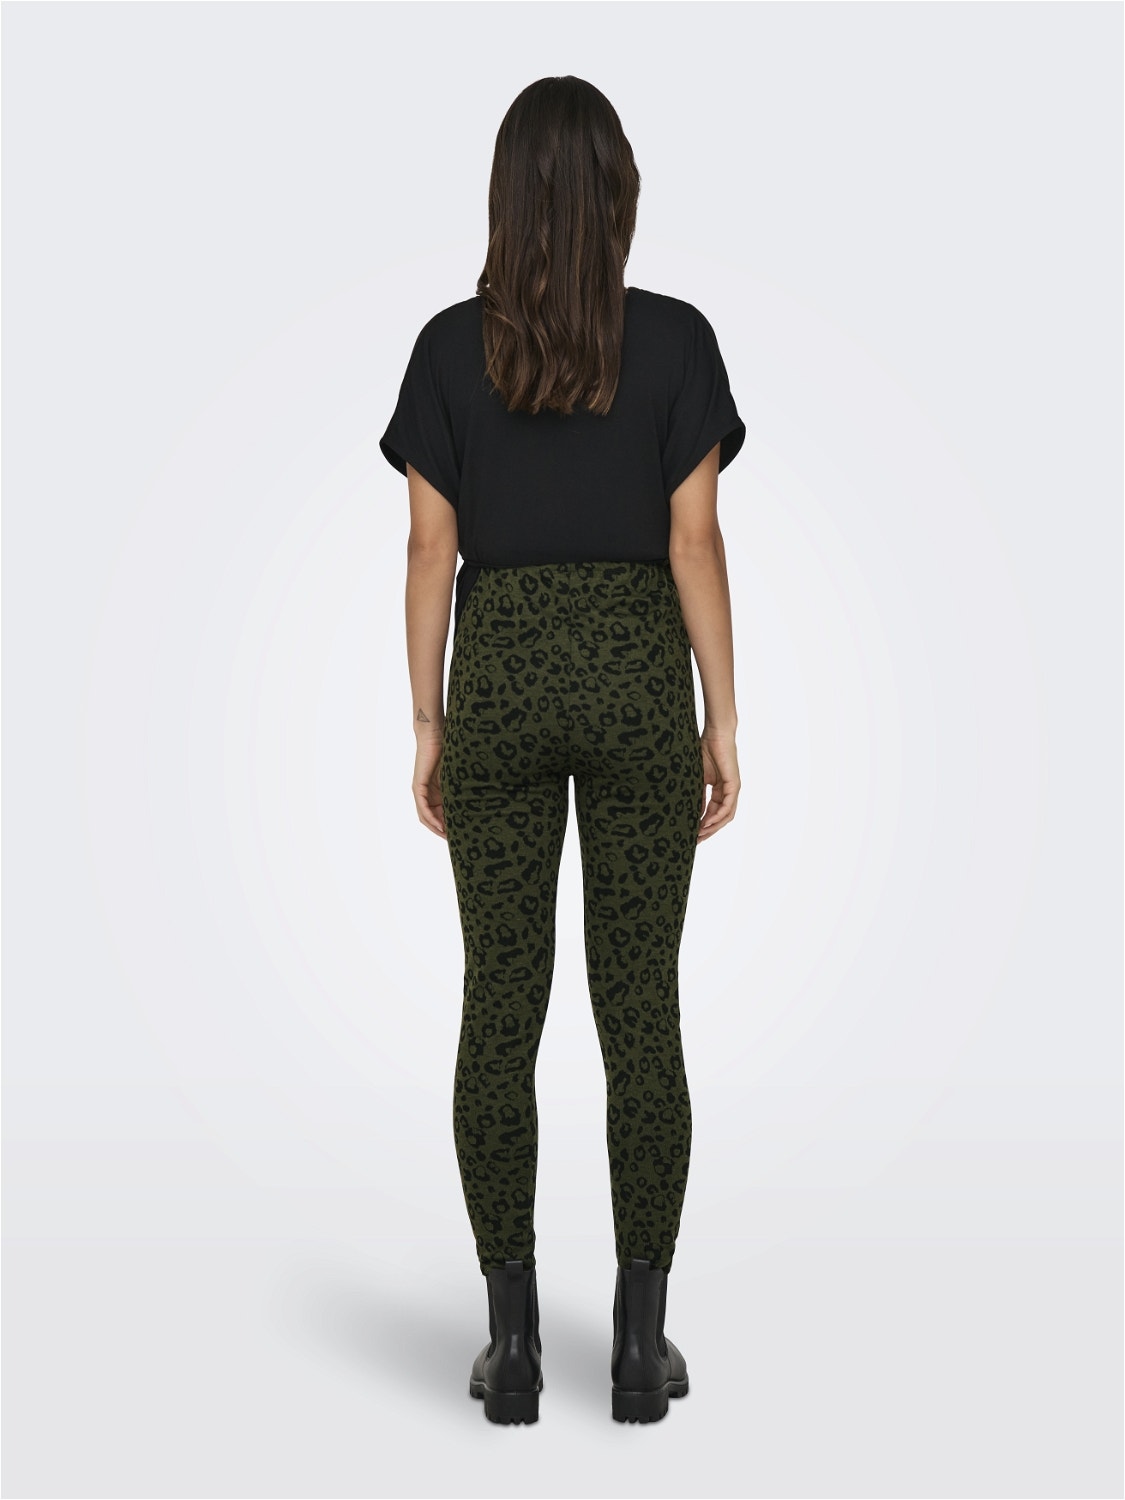 ONLY Mama printed leggings -Olive Green - 15315017